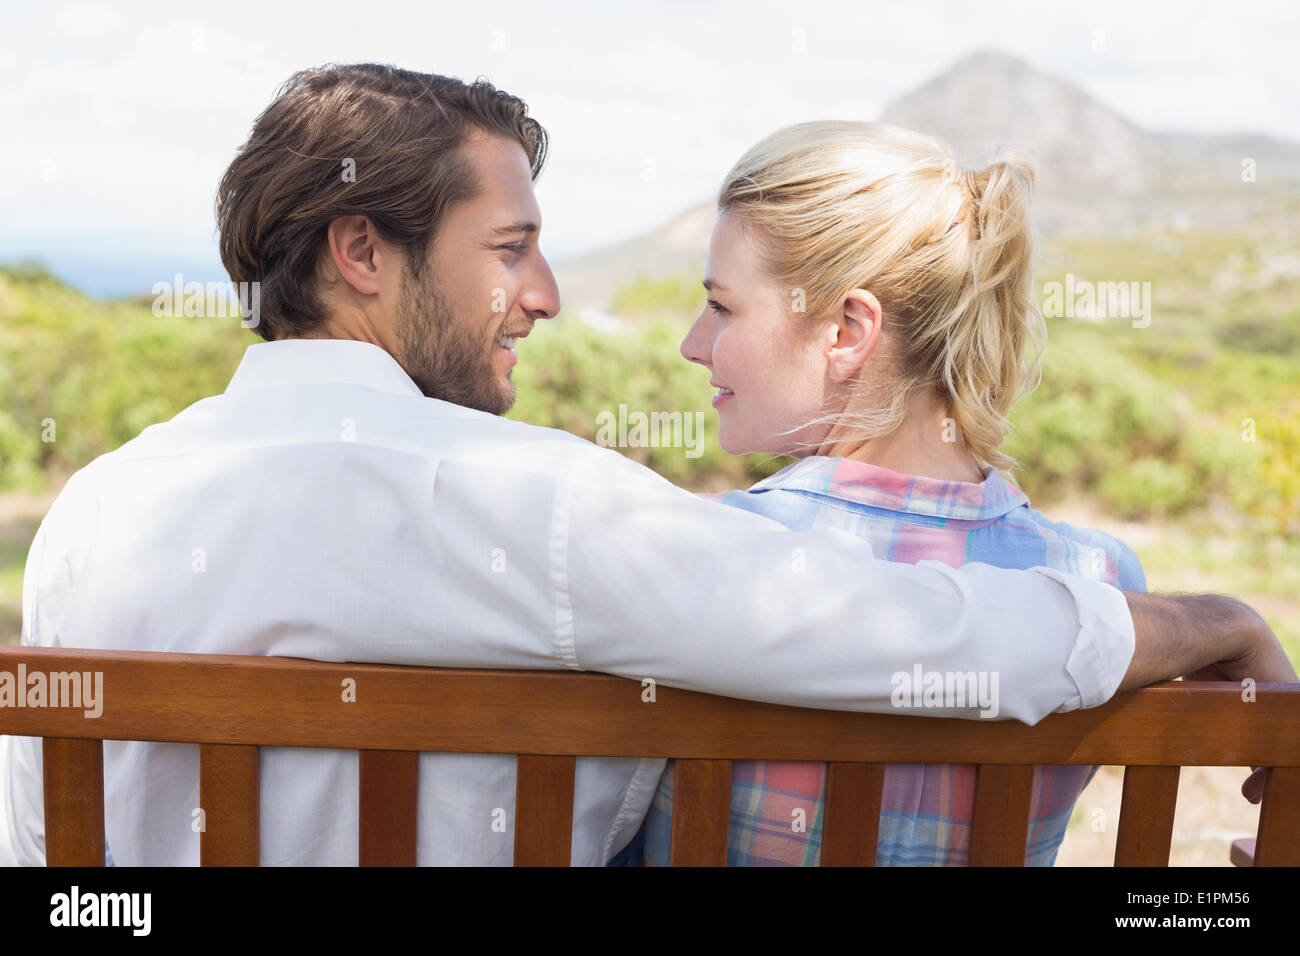 Cute couple sitting on bench together Stock Photo